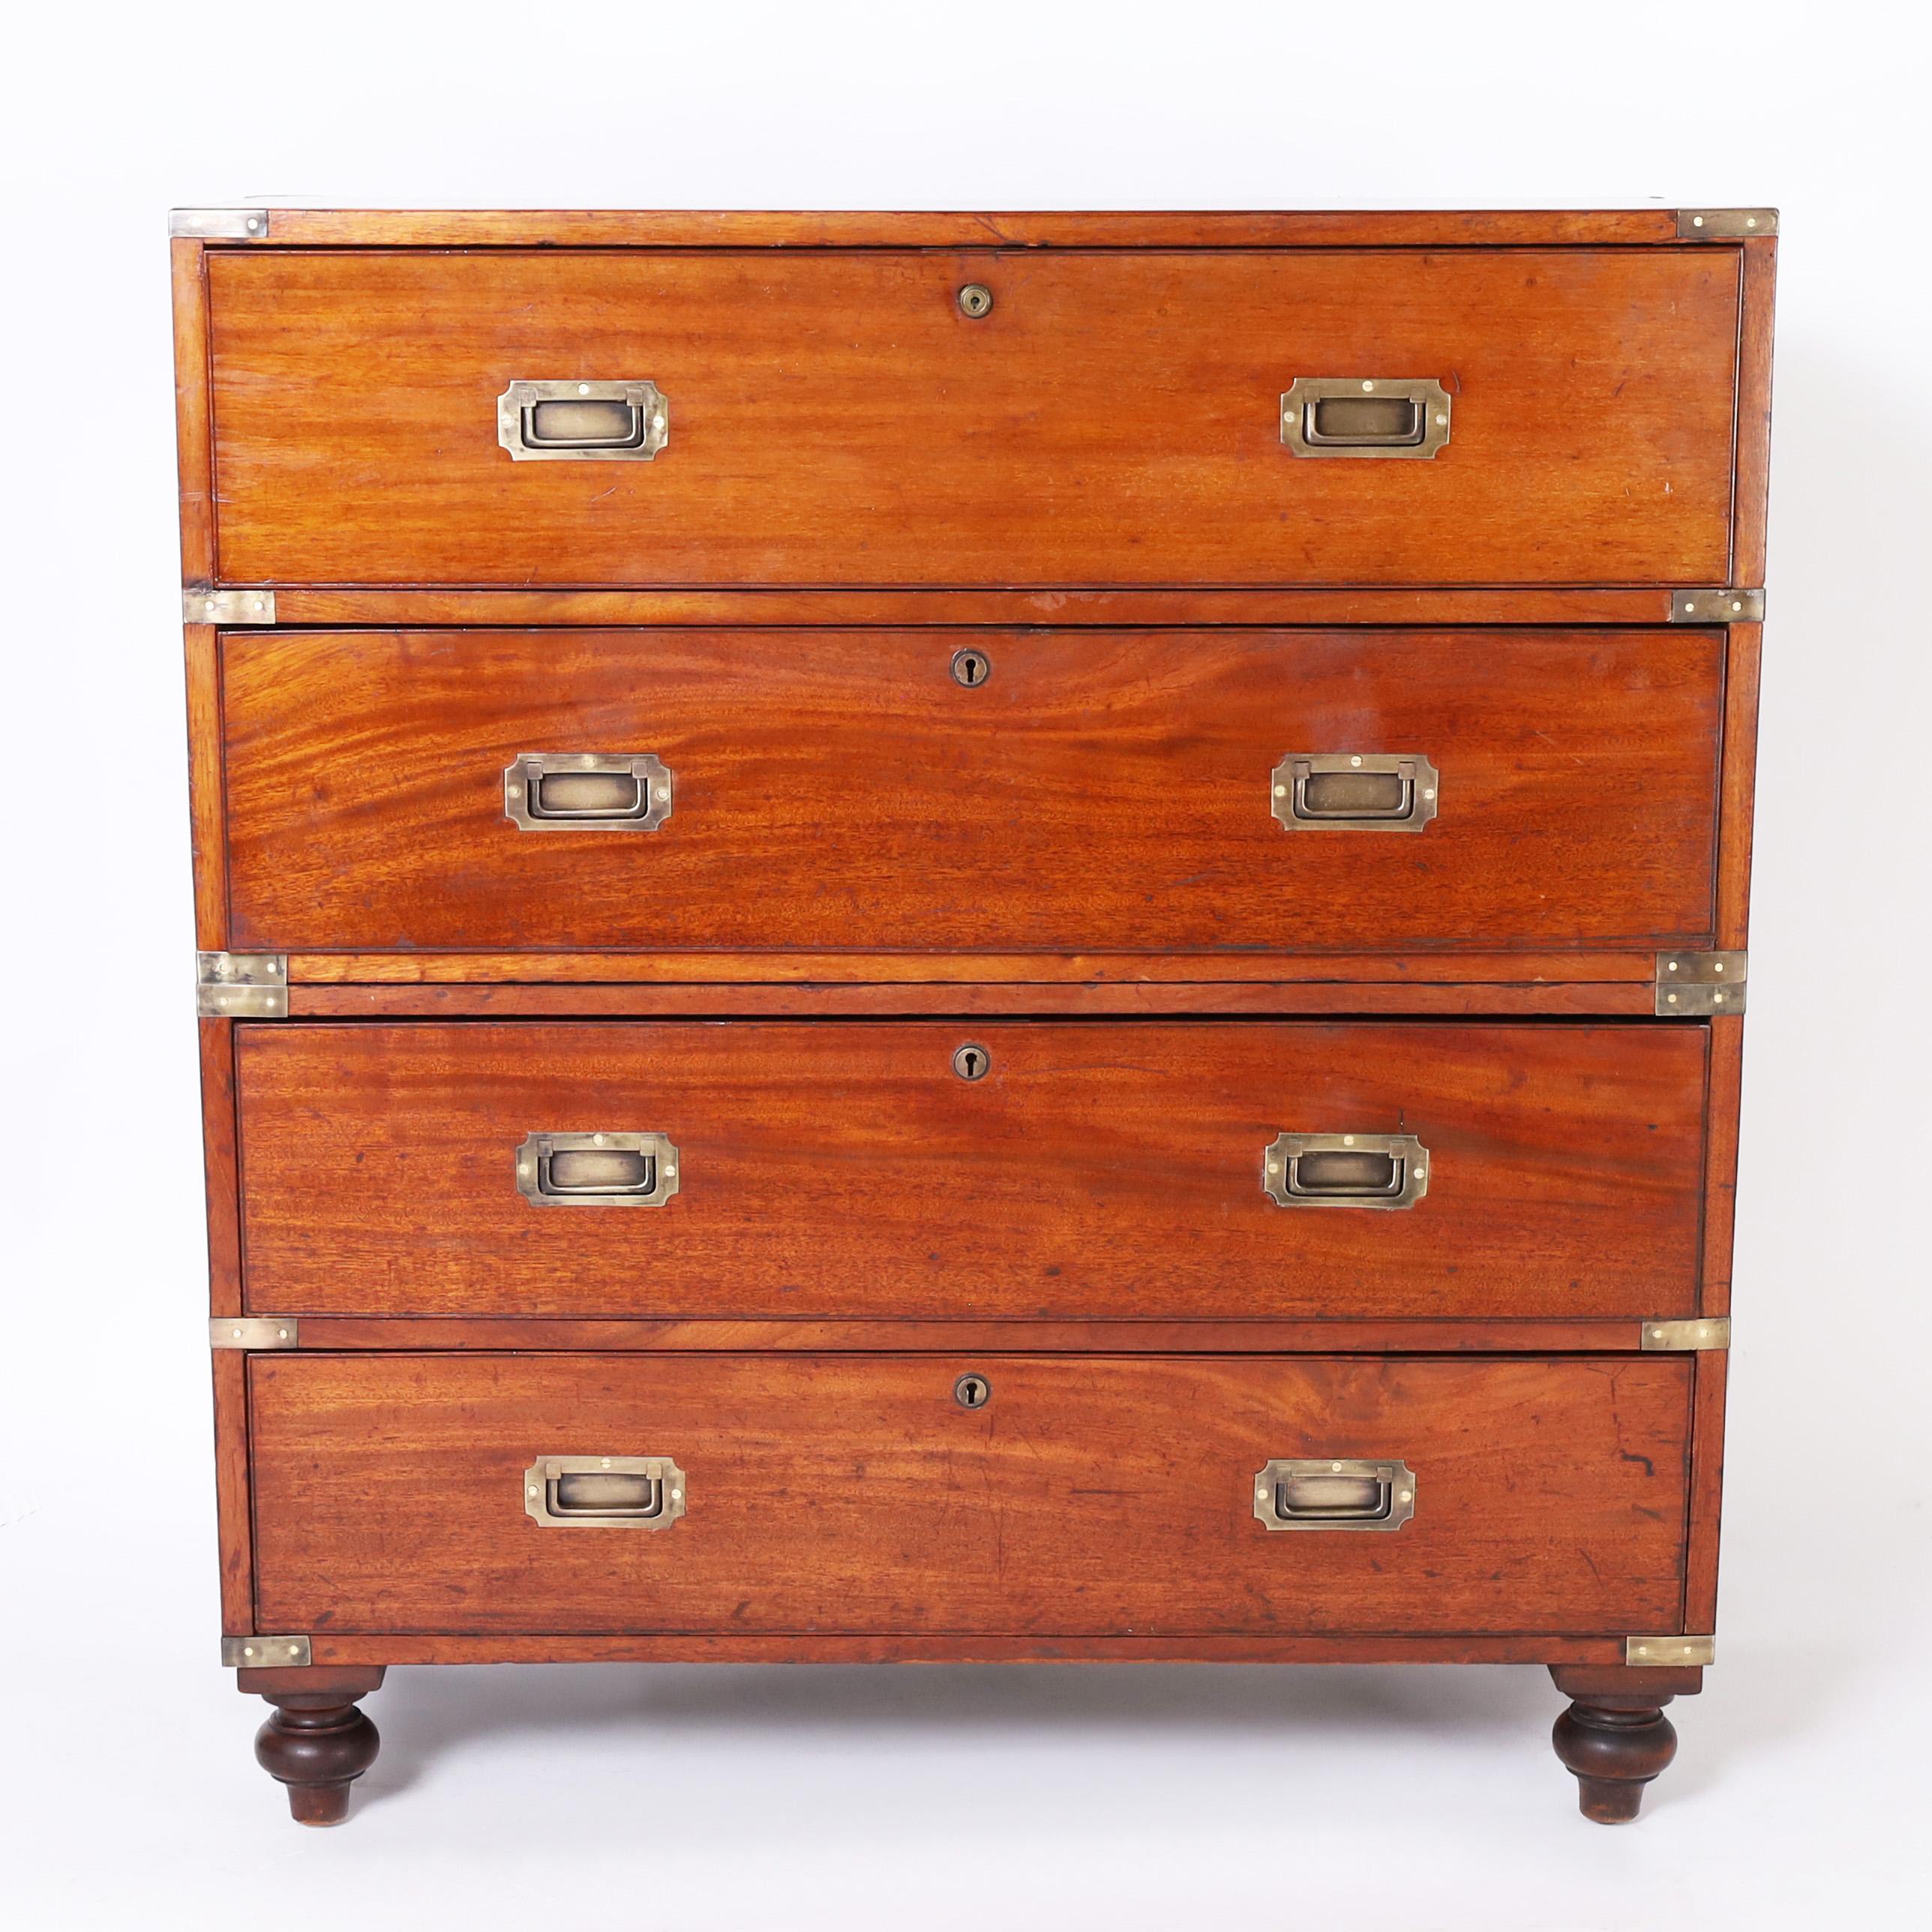 Handsome 19th century campaign chest secretary handcrafted in mahogany in a two-piece construction featuring a pull-out leather top secretary desk with nooks and drawers, three storage drawers below, brass hardware and turned feet.
